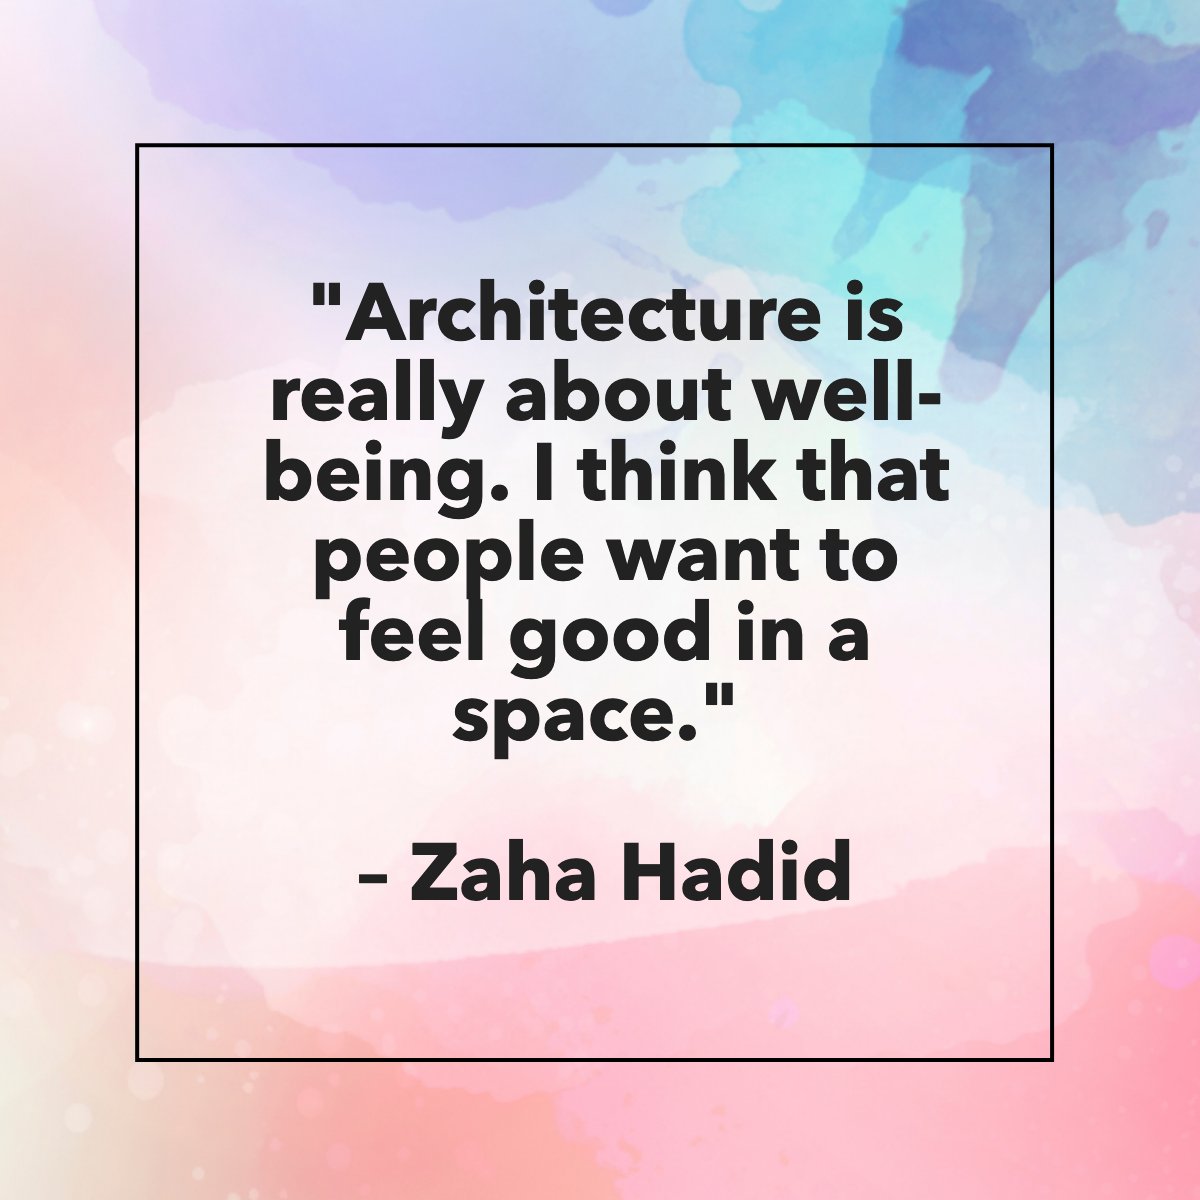 'Architecture is really about well-being. I think that people want to feel good in a space.'
― Zaha Hadid 📖

#quote  #quoteoftheday  #design  #style  #interiordesign  #comfort
#chadwickknight #realtor #realestate #floridarealtor #floridarealestate #mvprealty